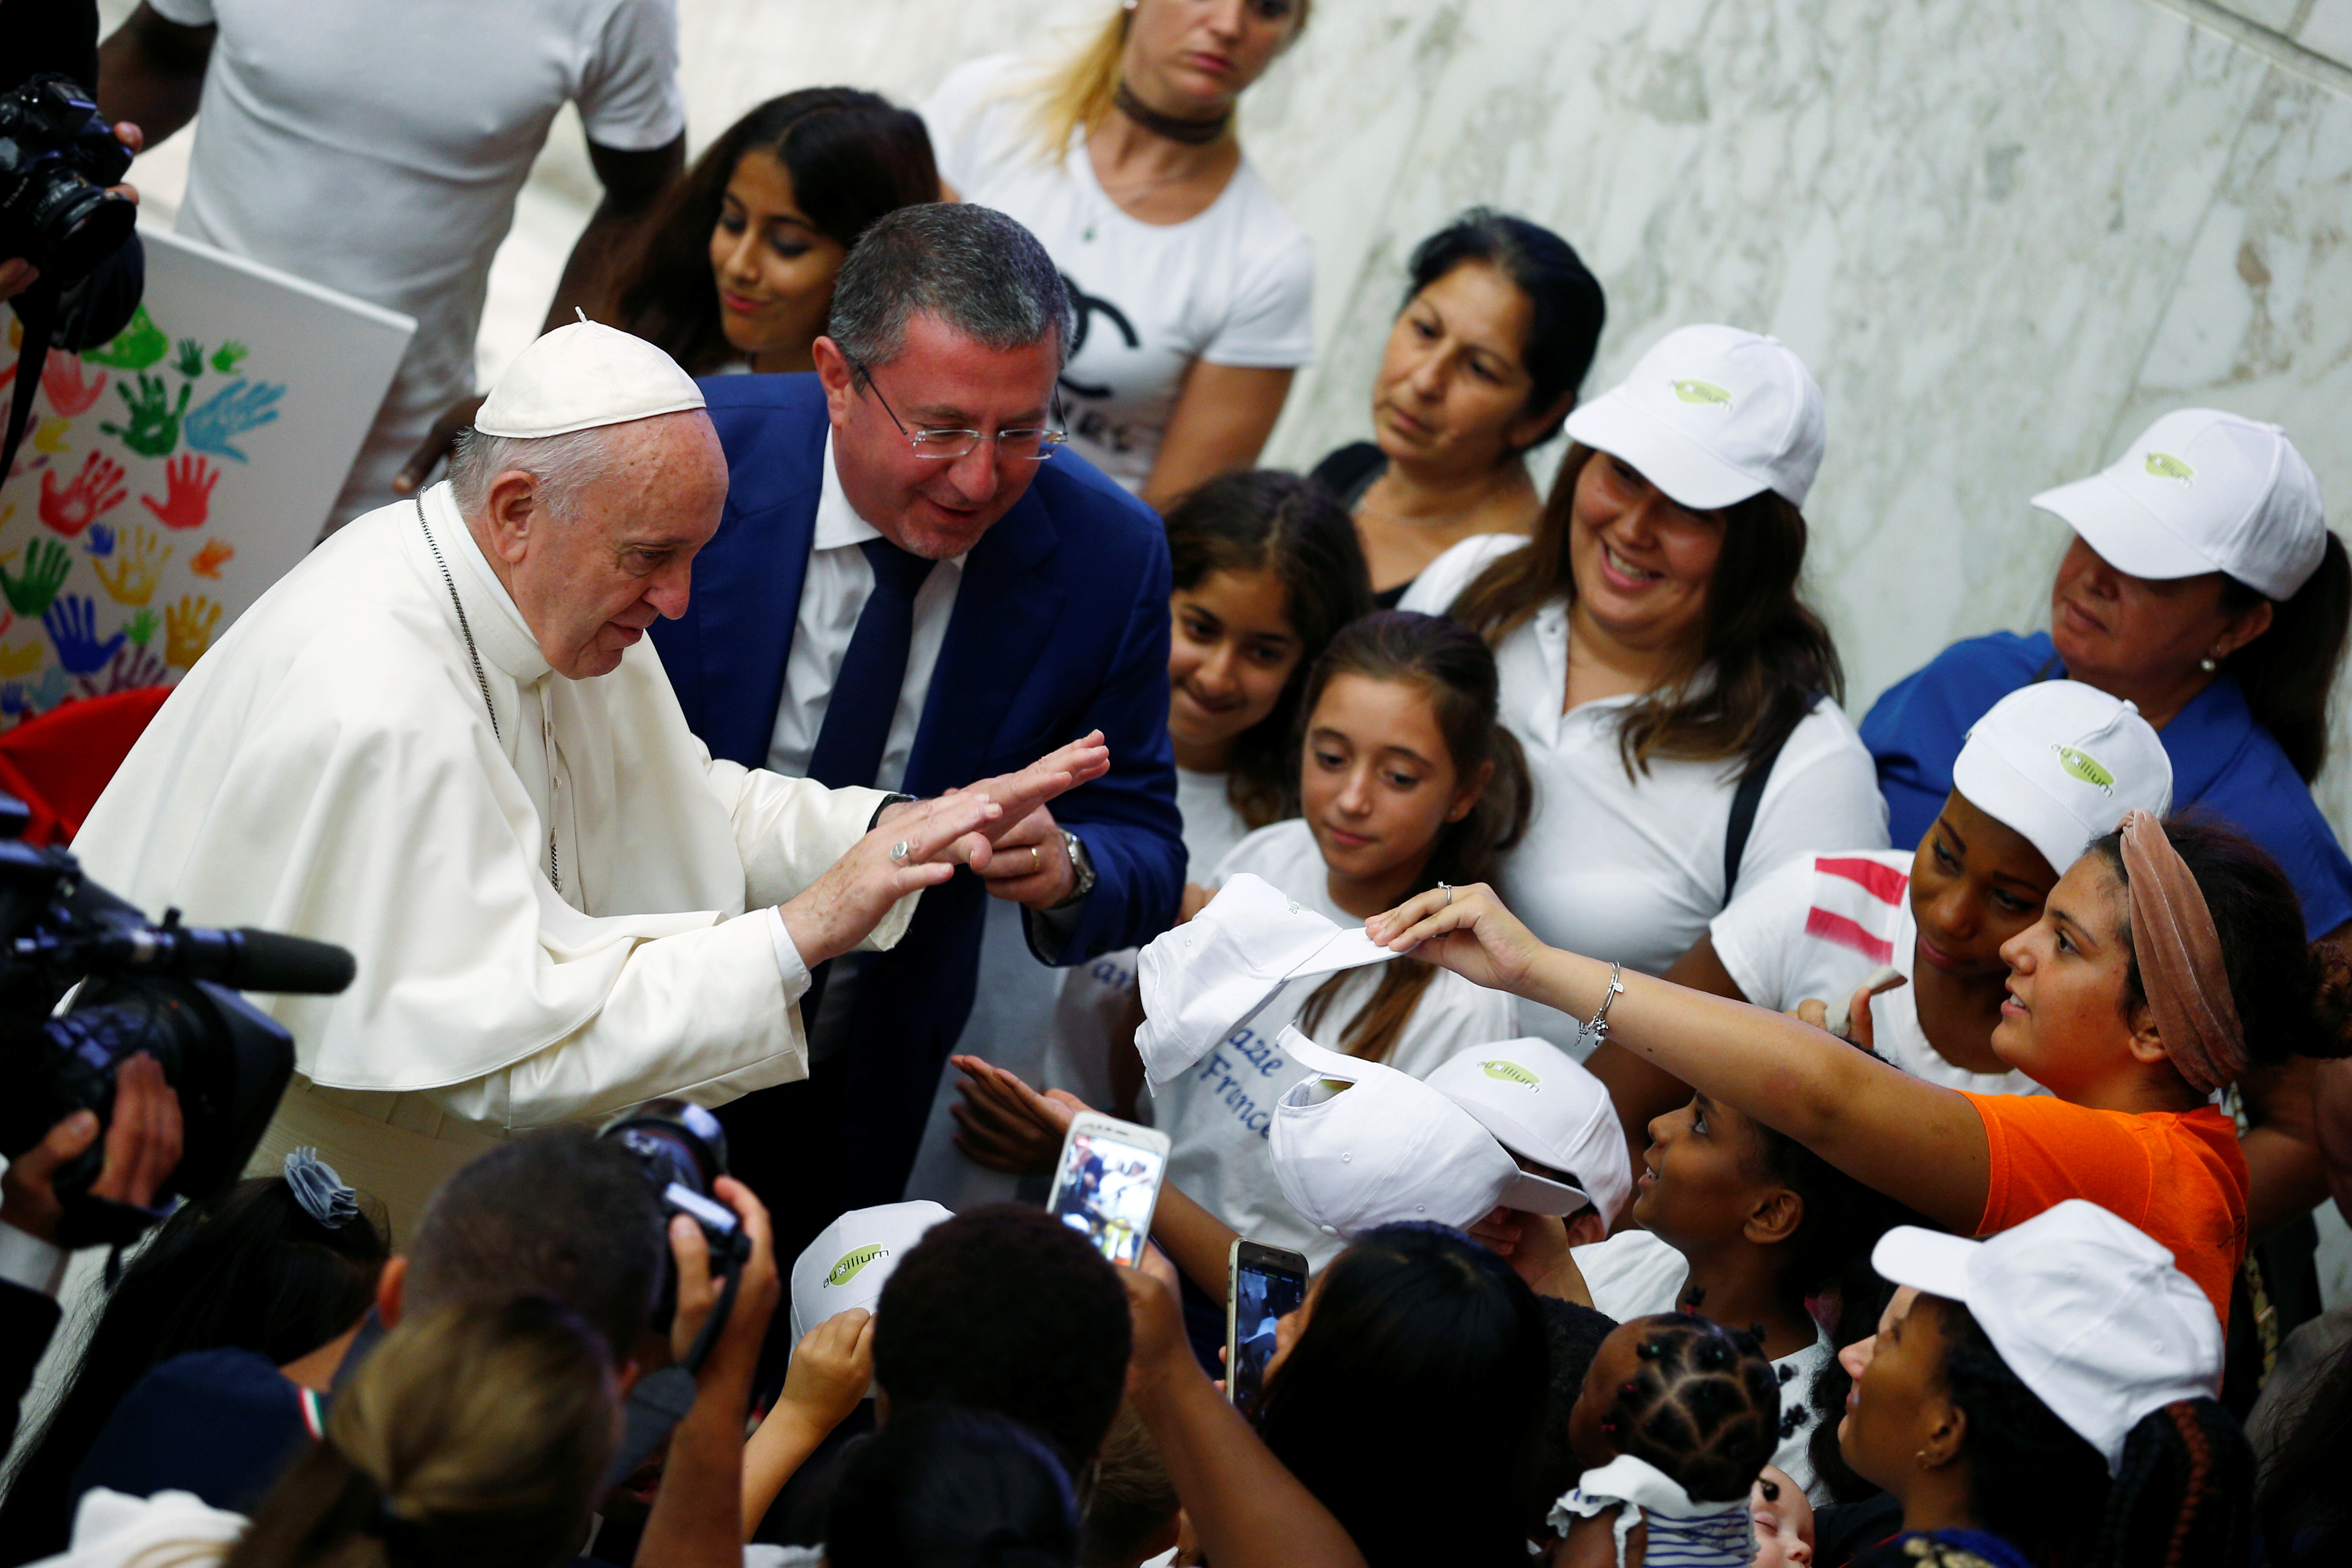 In new interview pope explains aim of Amazon synod and warns against nationalism